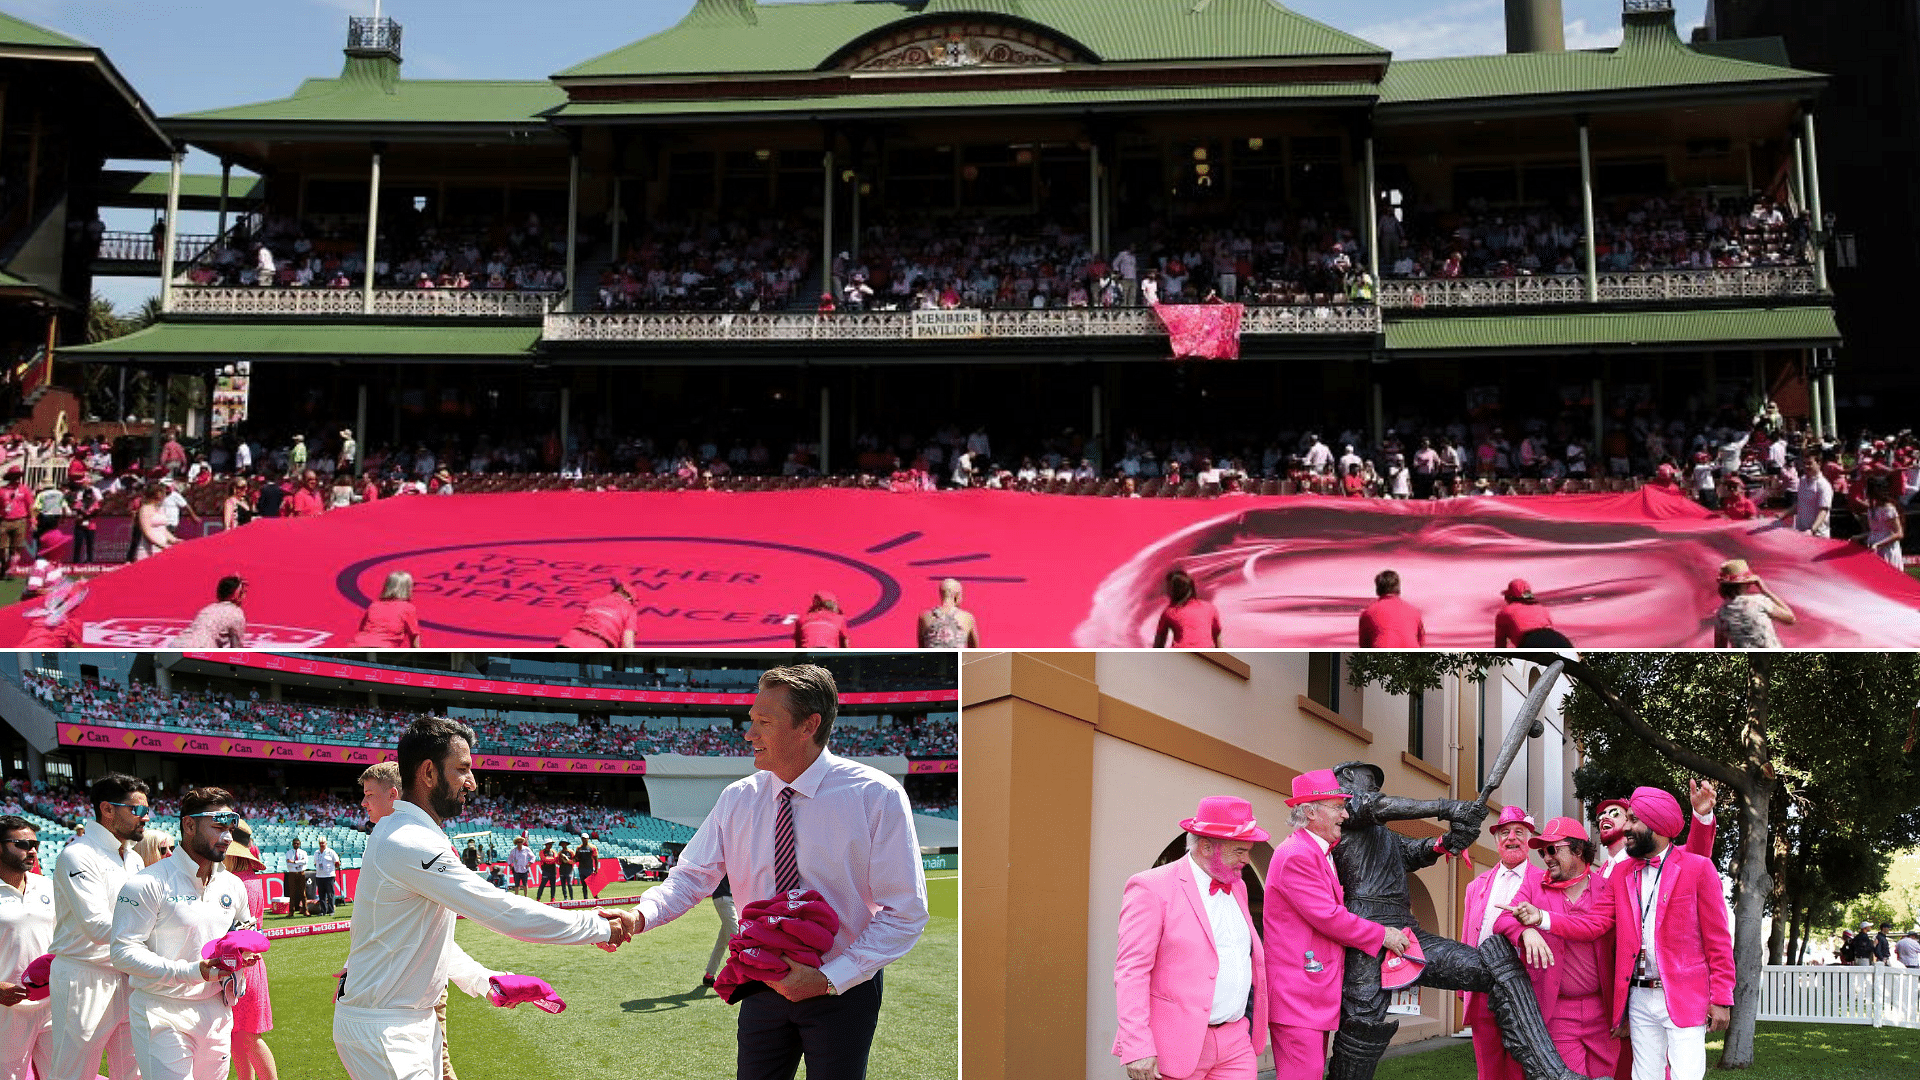 The third day of the New Year’s Test at Sydney is known as ‘Jane McGrath Day’, with teams and fans donning pink in support of the fight against breast cancer.